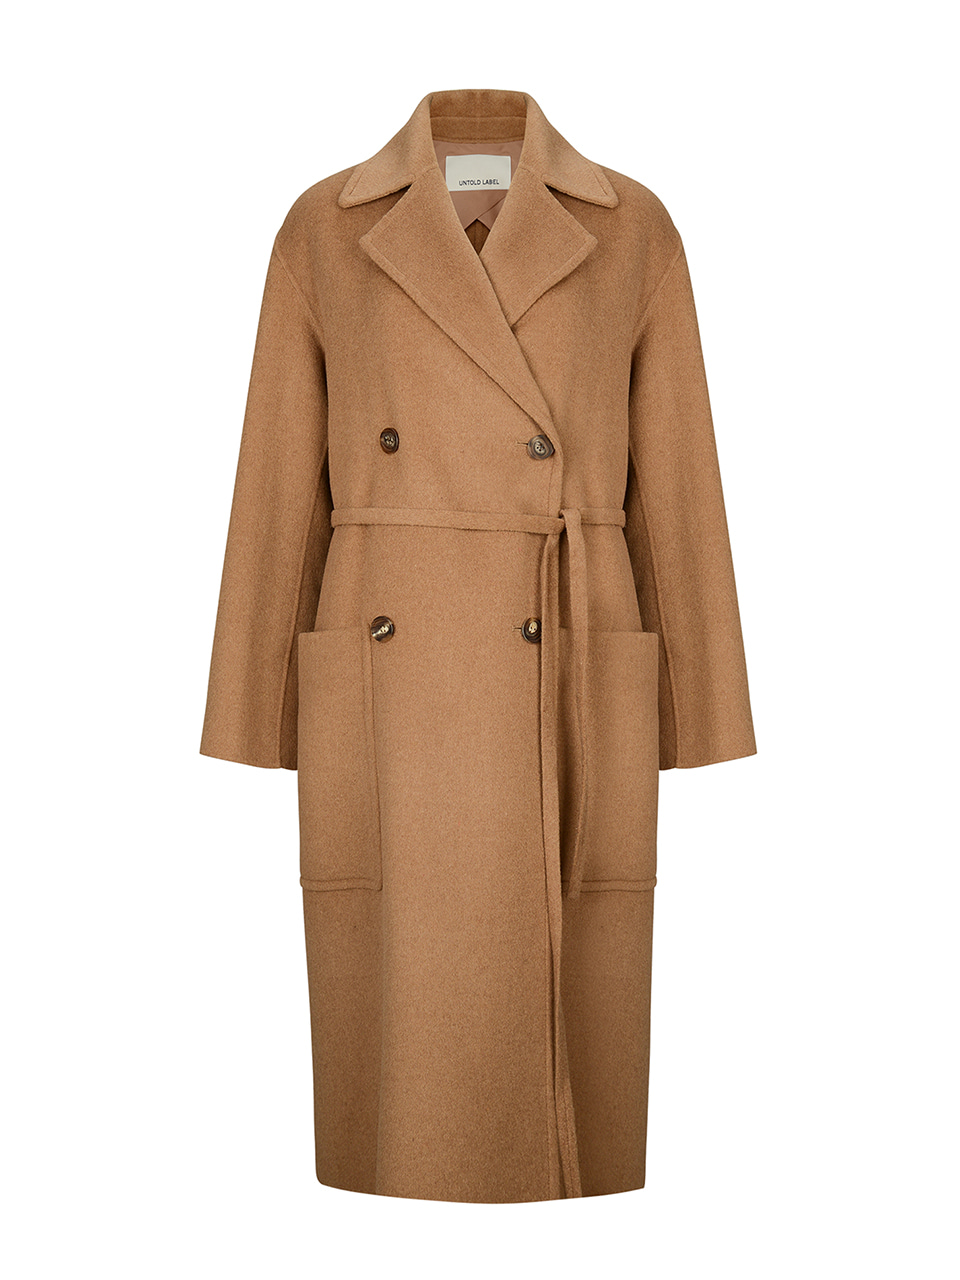 THIN BELTED CASHMERE DOUBLE COAT - CAMEL